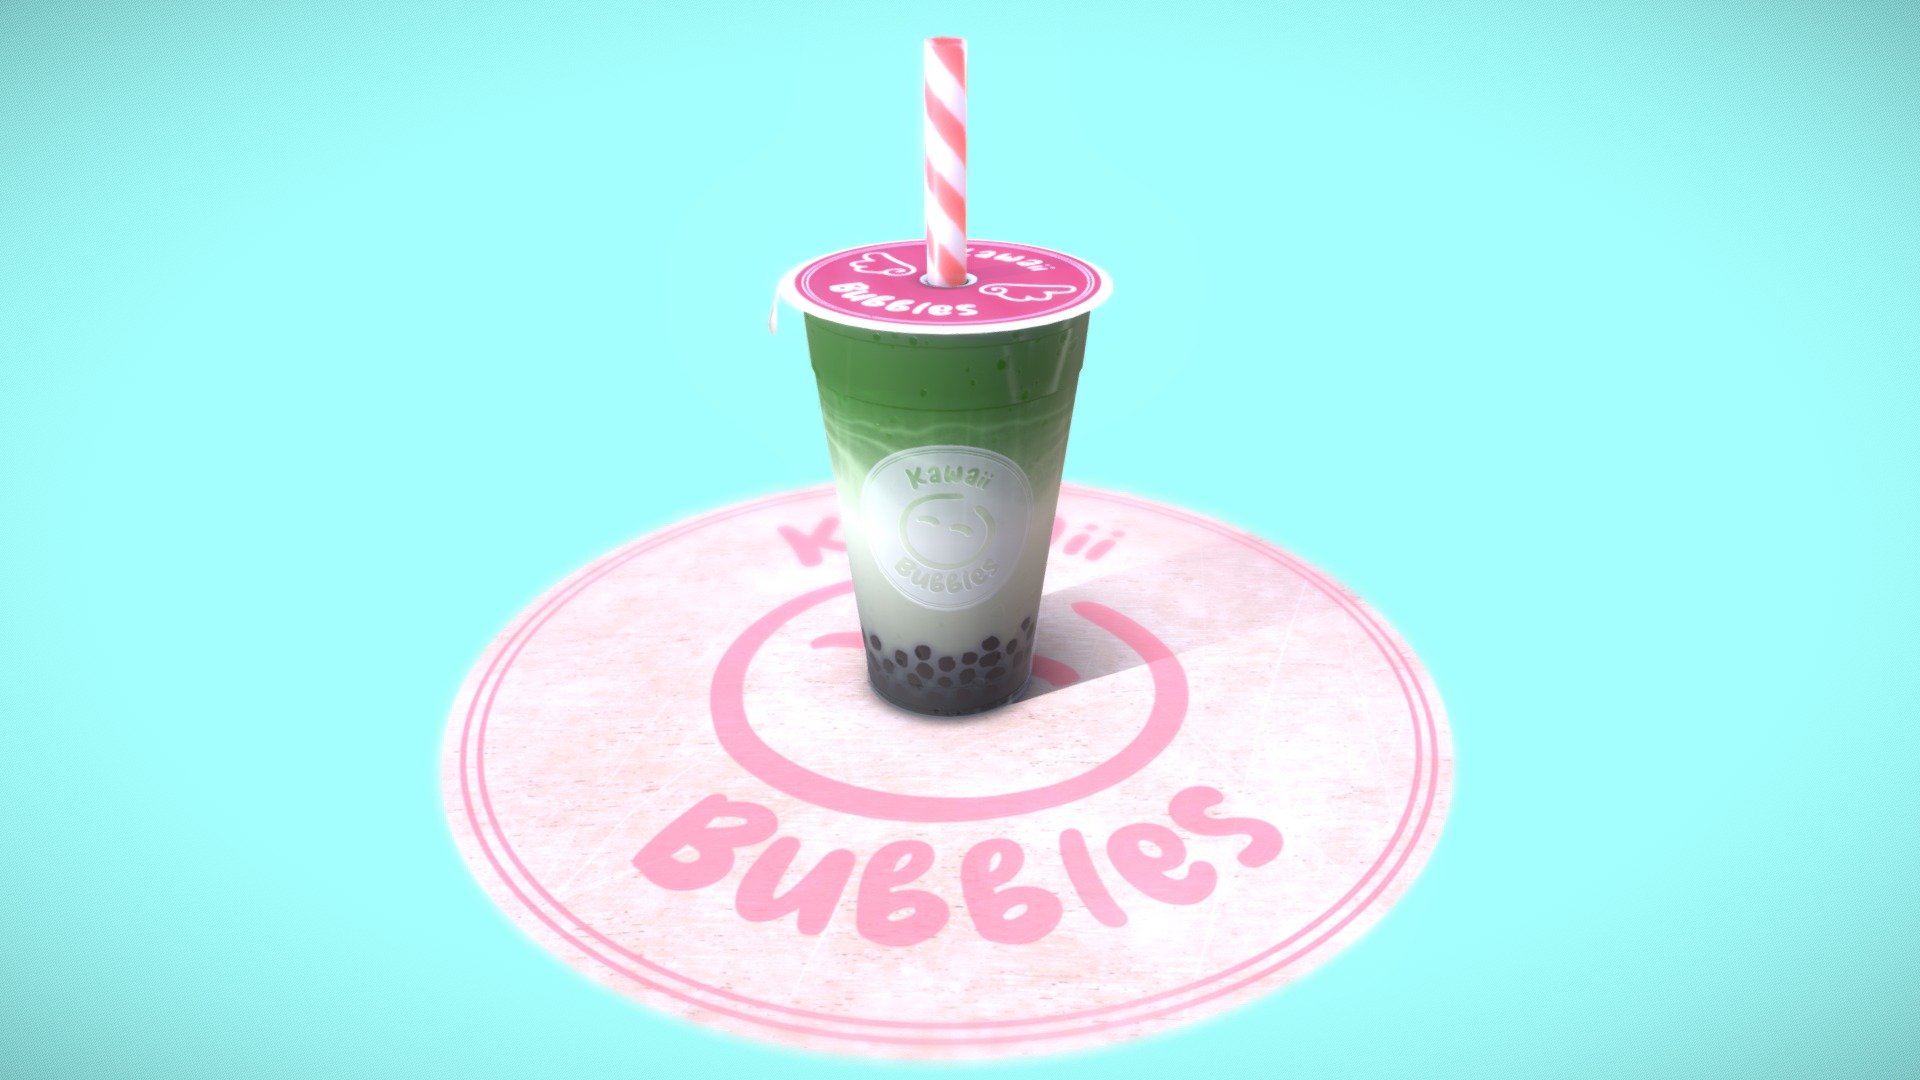 This is my entry for the #SketchfabWeeklyChallenge with the theme : Drink.

A refreshing matcha latte bubble tea. I like this drink for its sweetness and originality.

I used Blender for the modeling, Sustance Painter for most of the textures, and Photoshop to create the Kawaii Bubbles brand 3d model